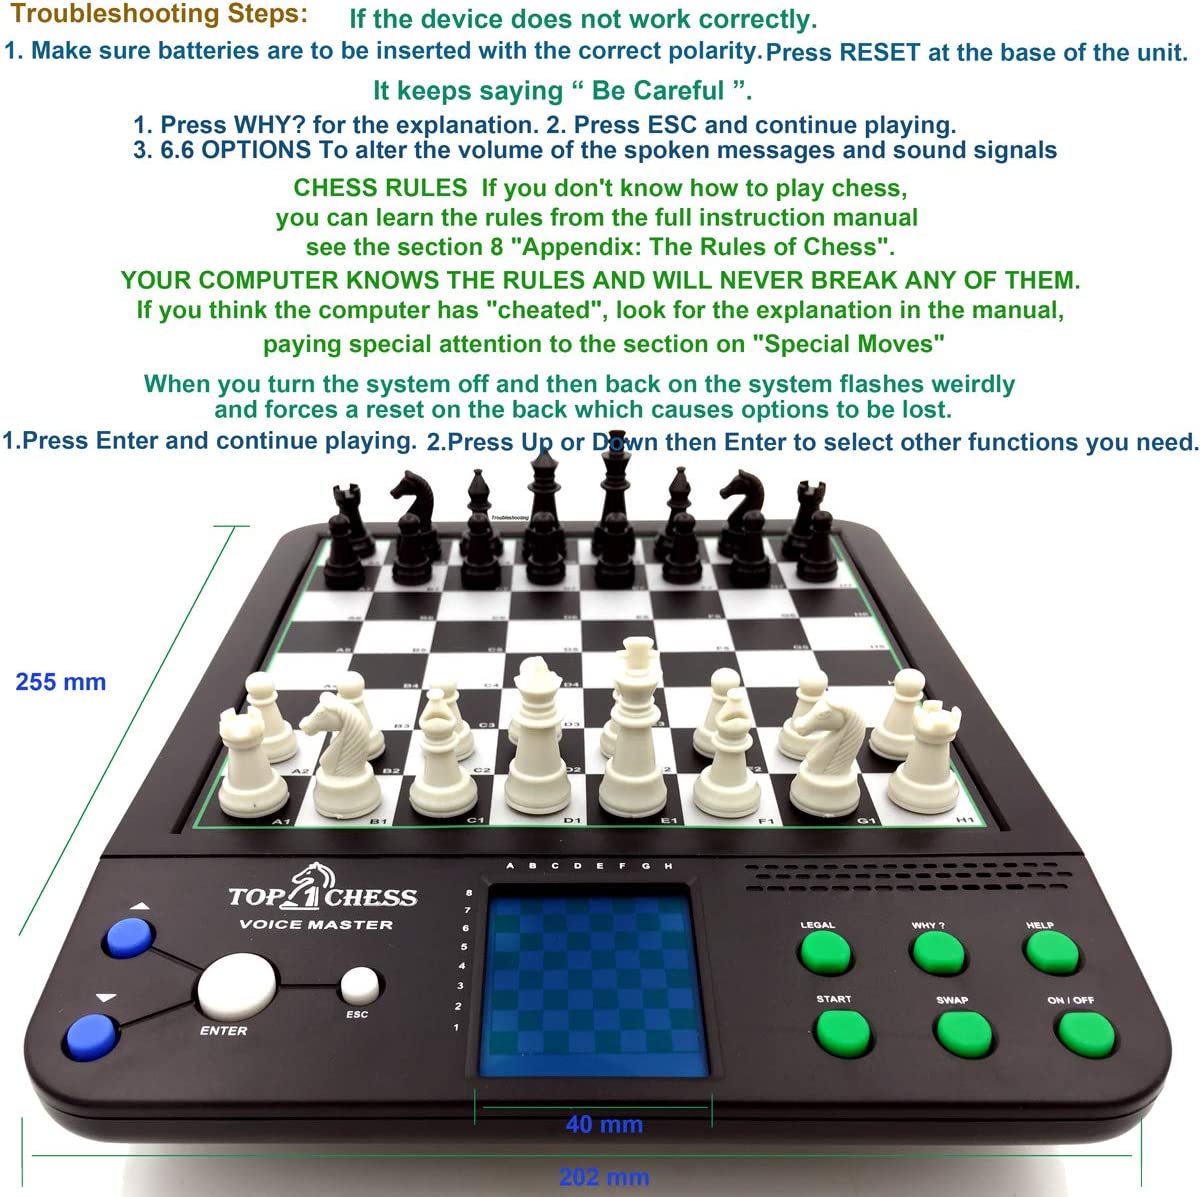 Top 1 Chess Electronic Chess Set | Chess Sets for Adults | Chess Set for Kids | Voice Chess Computer Teaching System | Chess Strategy Beginners Improving | Large Screen Learning Chess Set Board Game - image 5 of 7